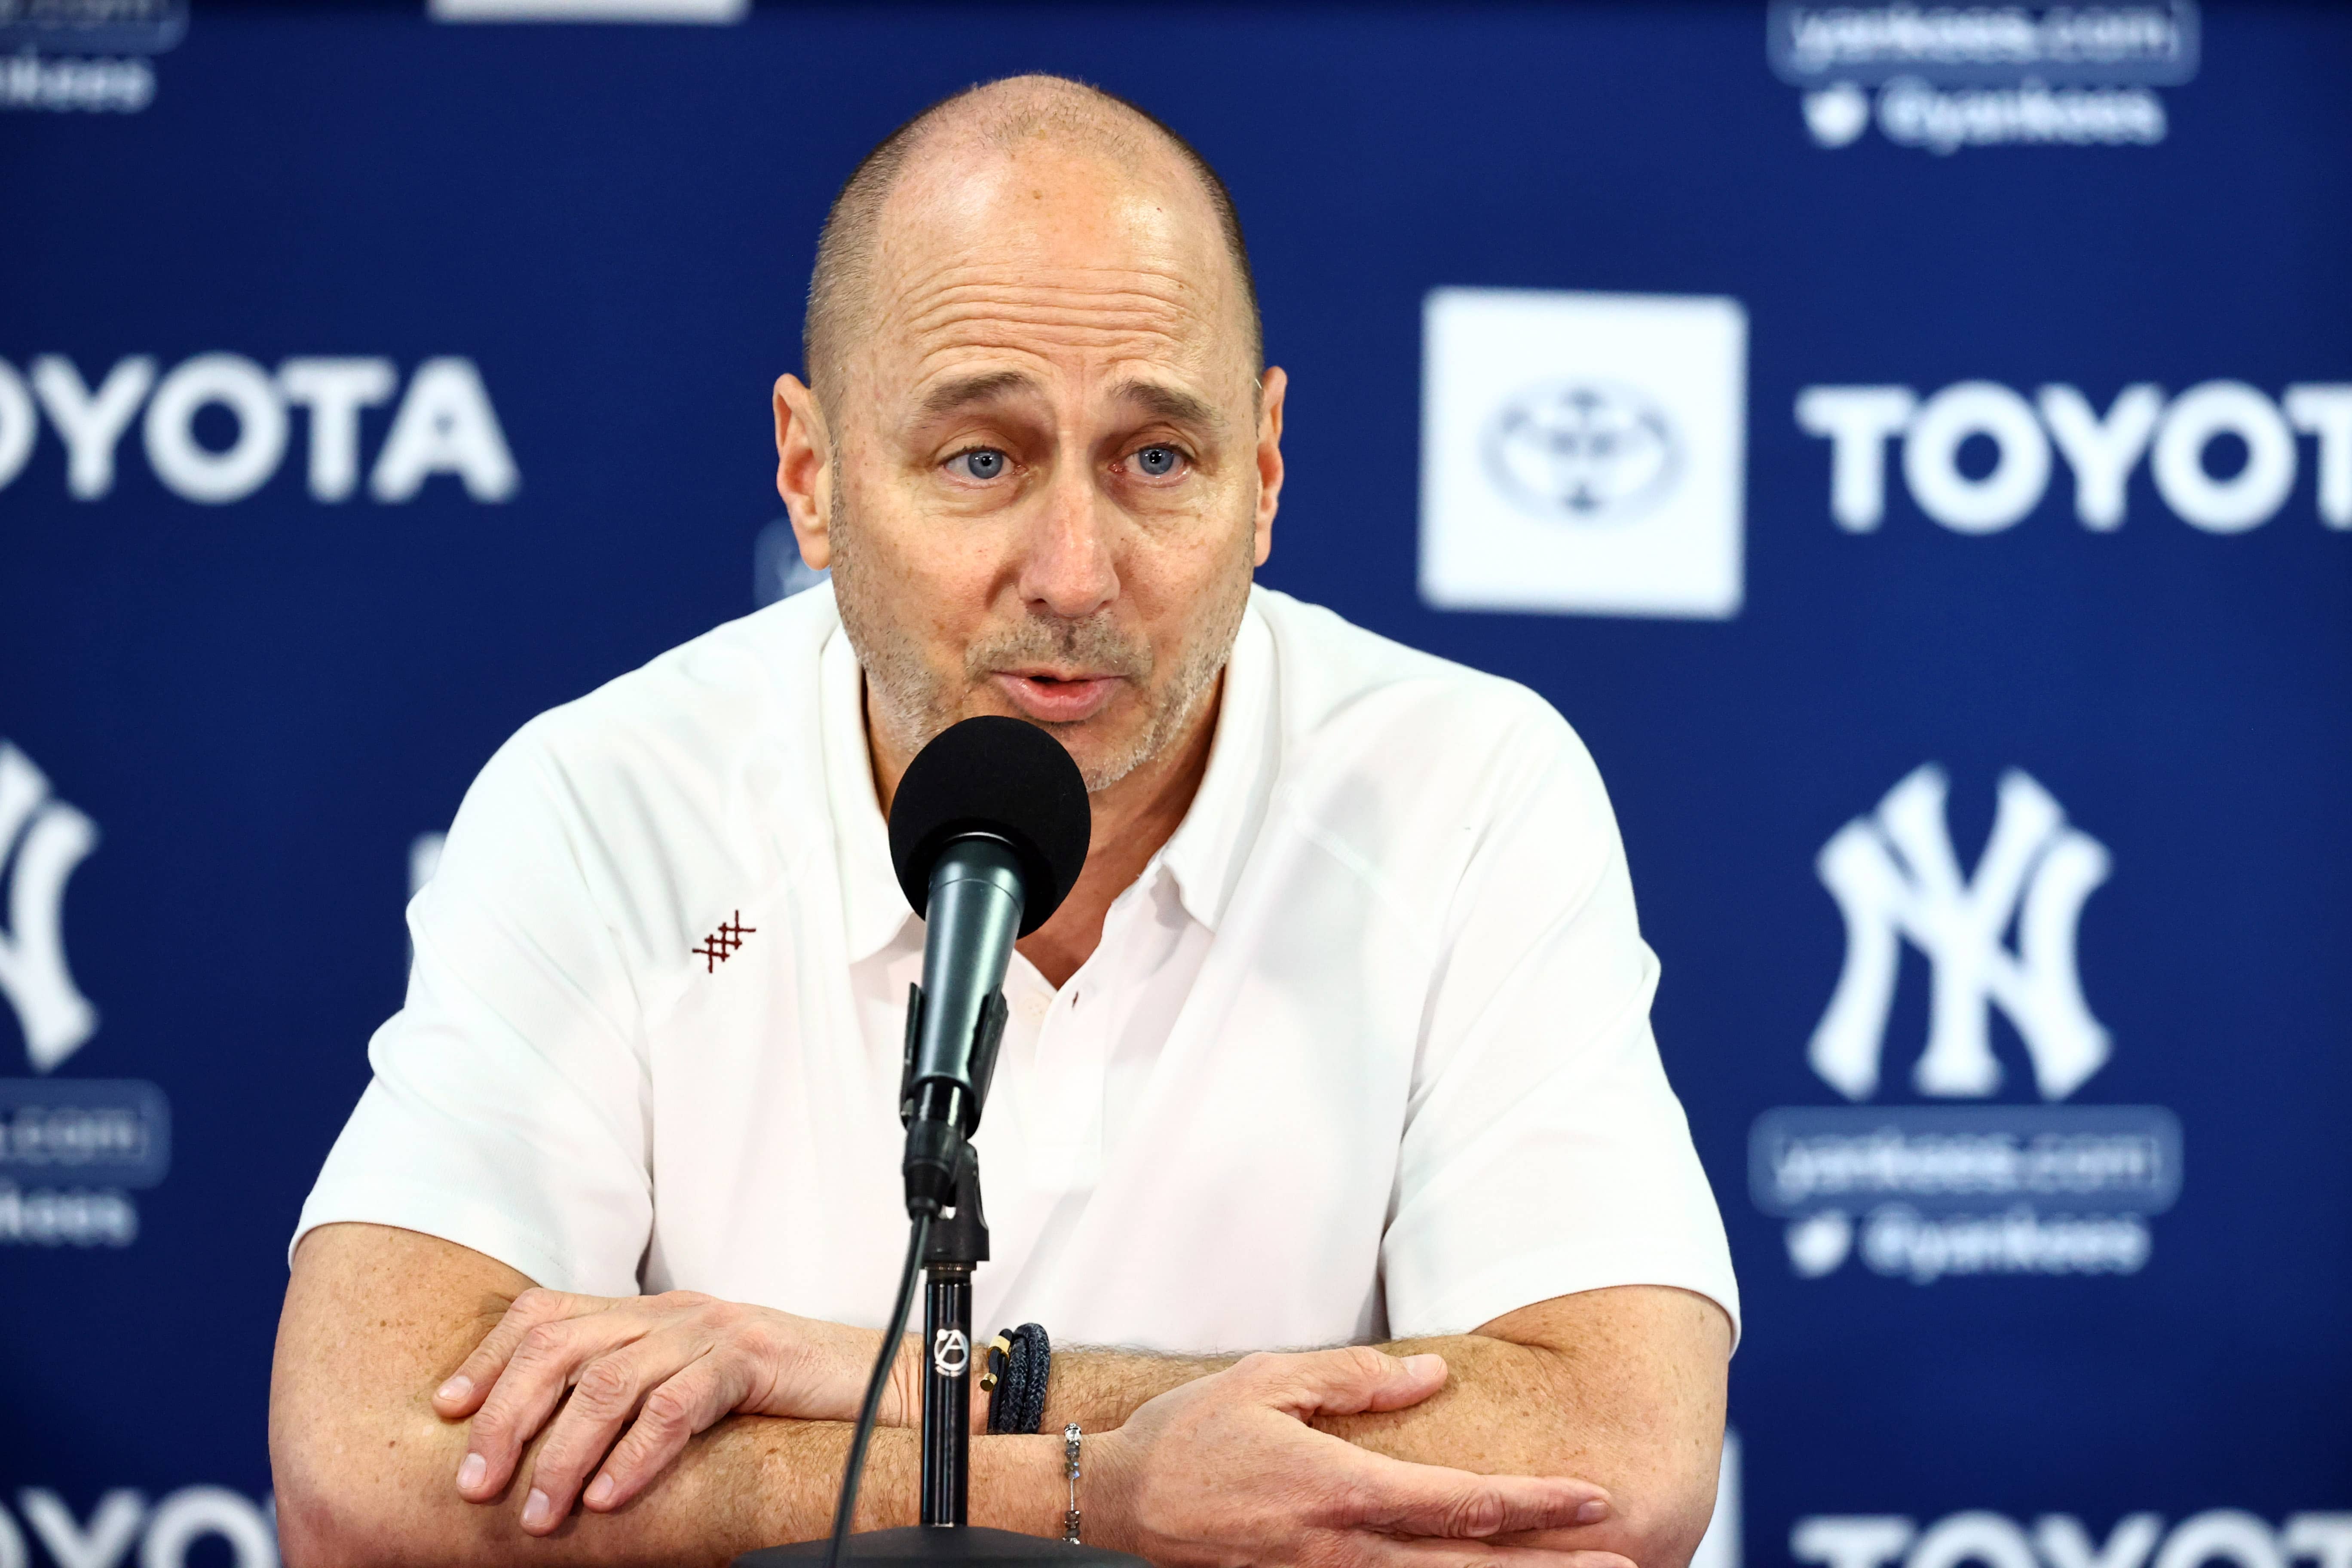 Yankees could reinforce starting rotation with Cashman trade bust